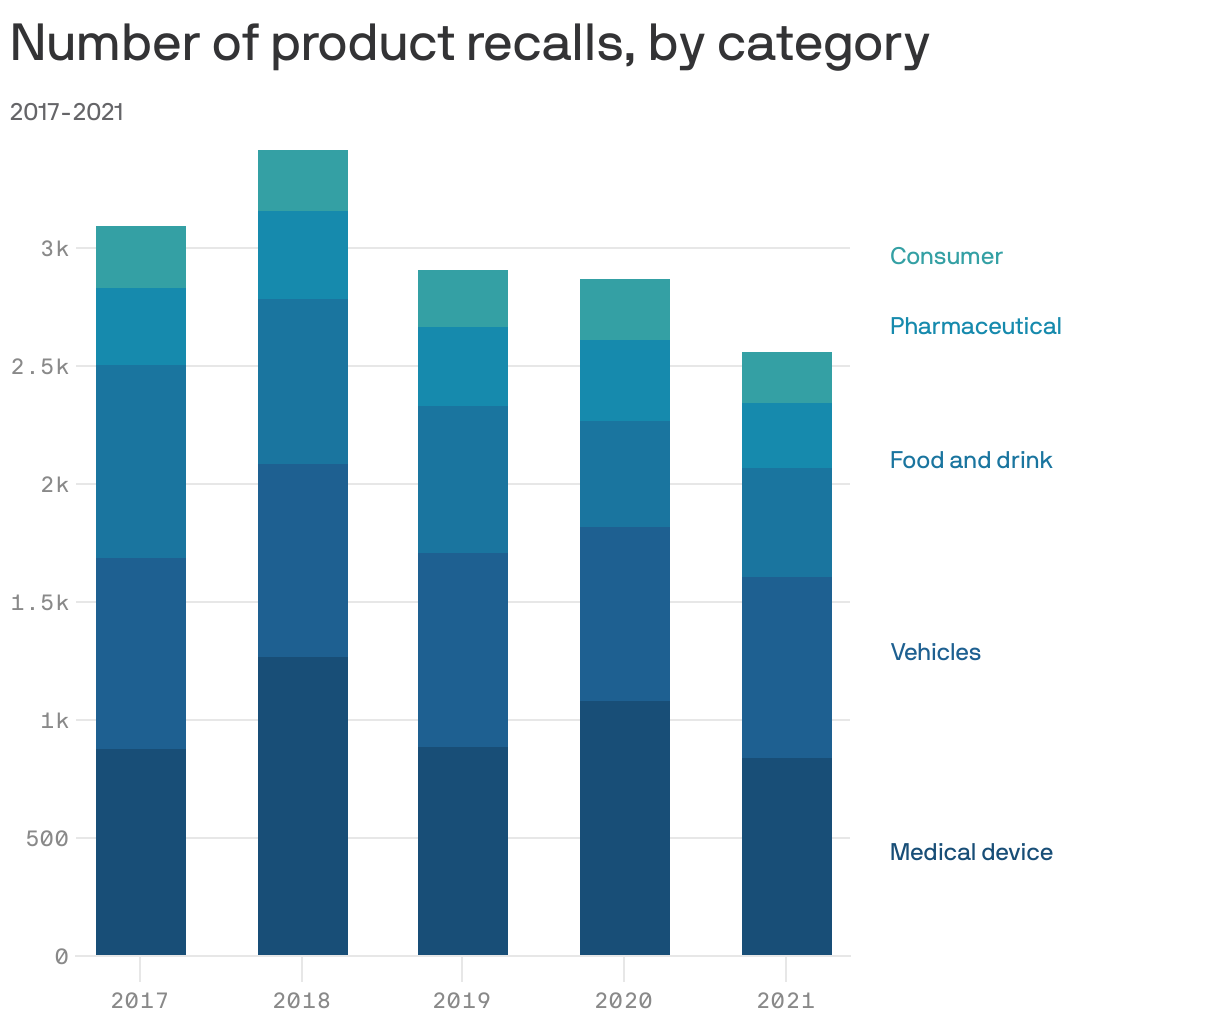 Number of product recalls, by category 